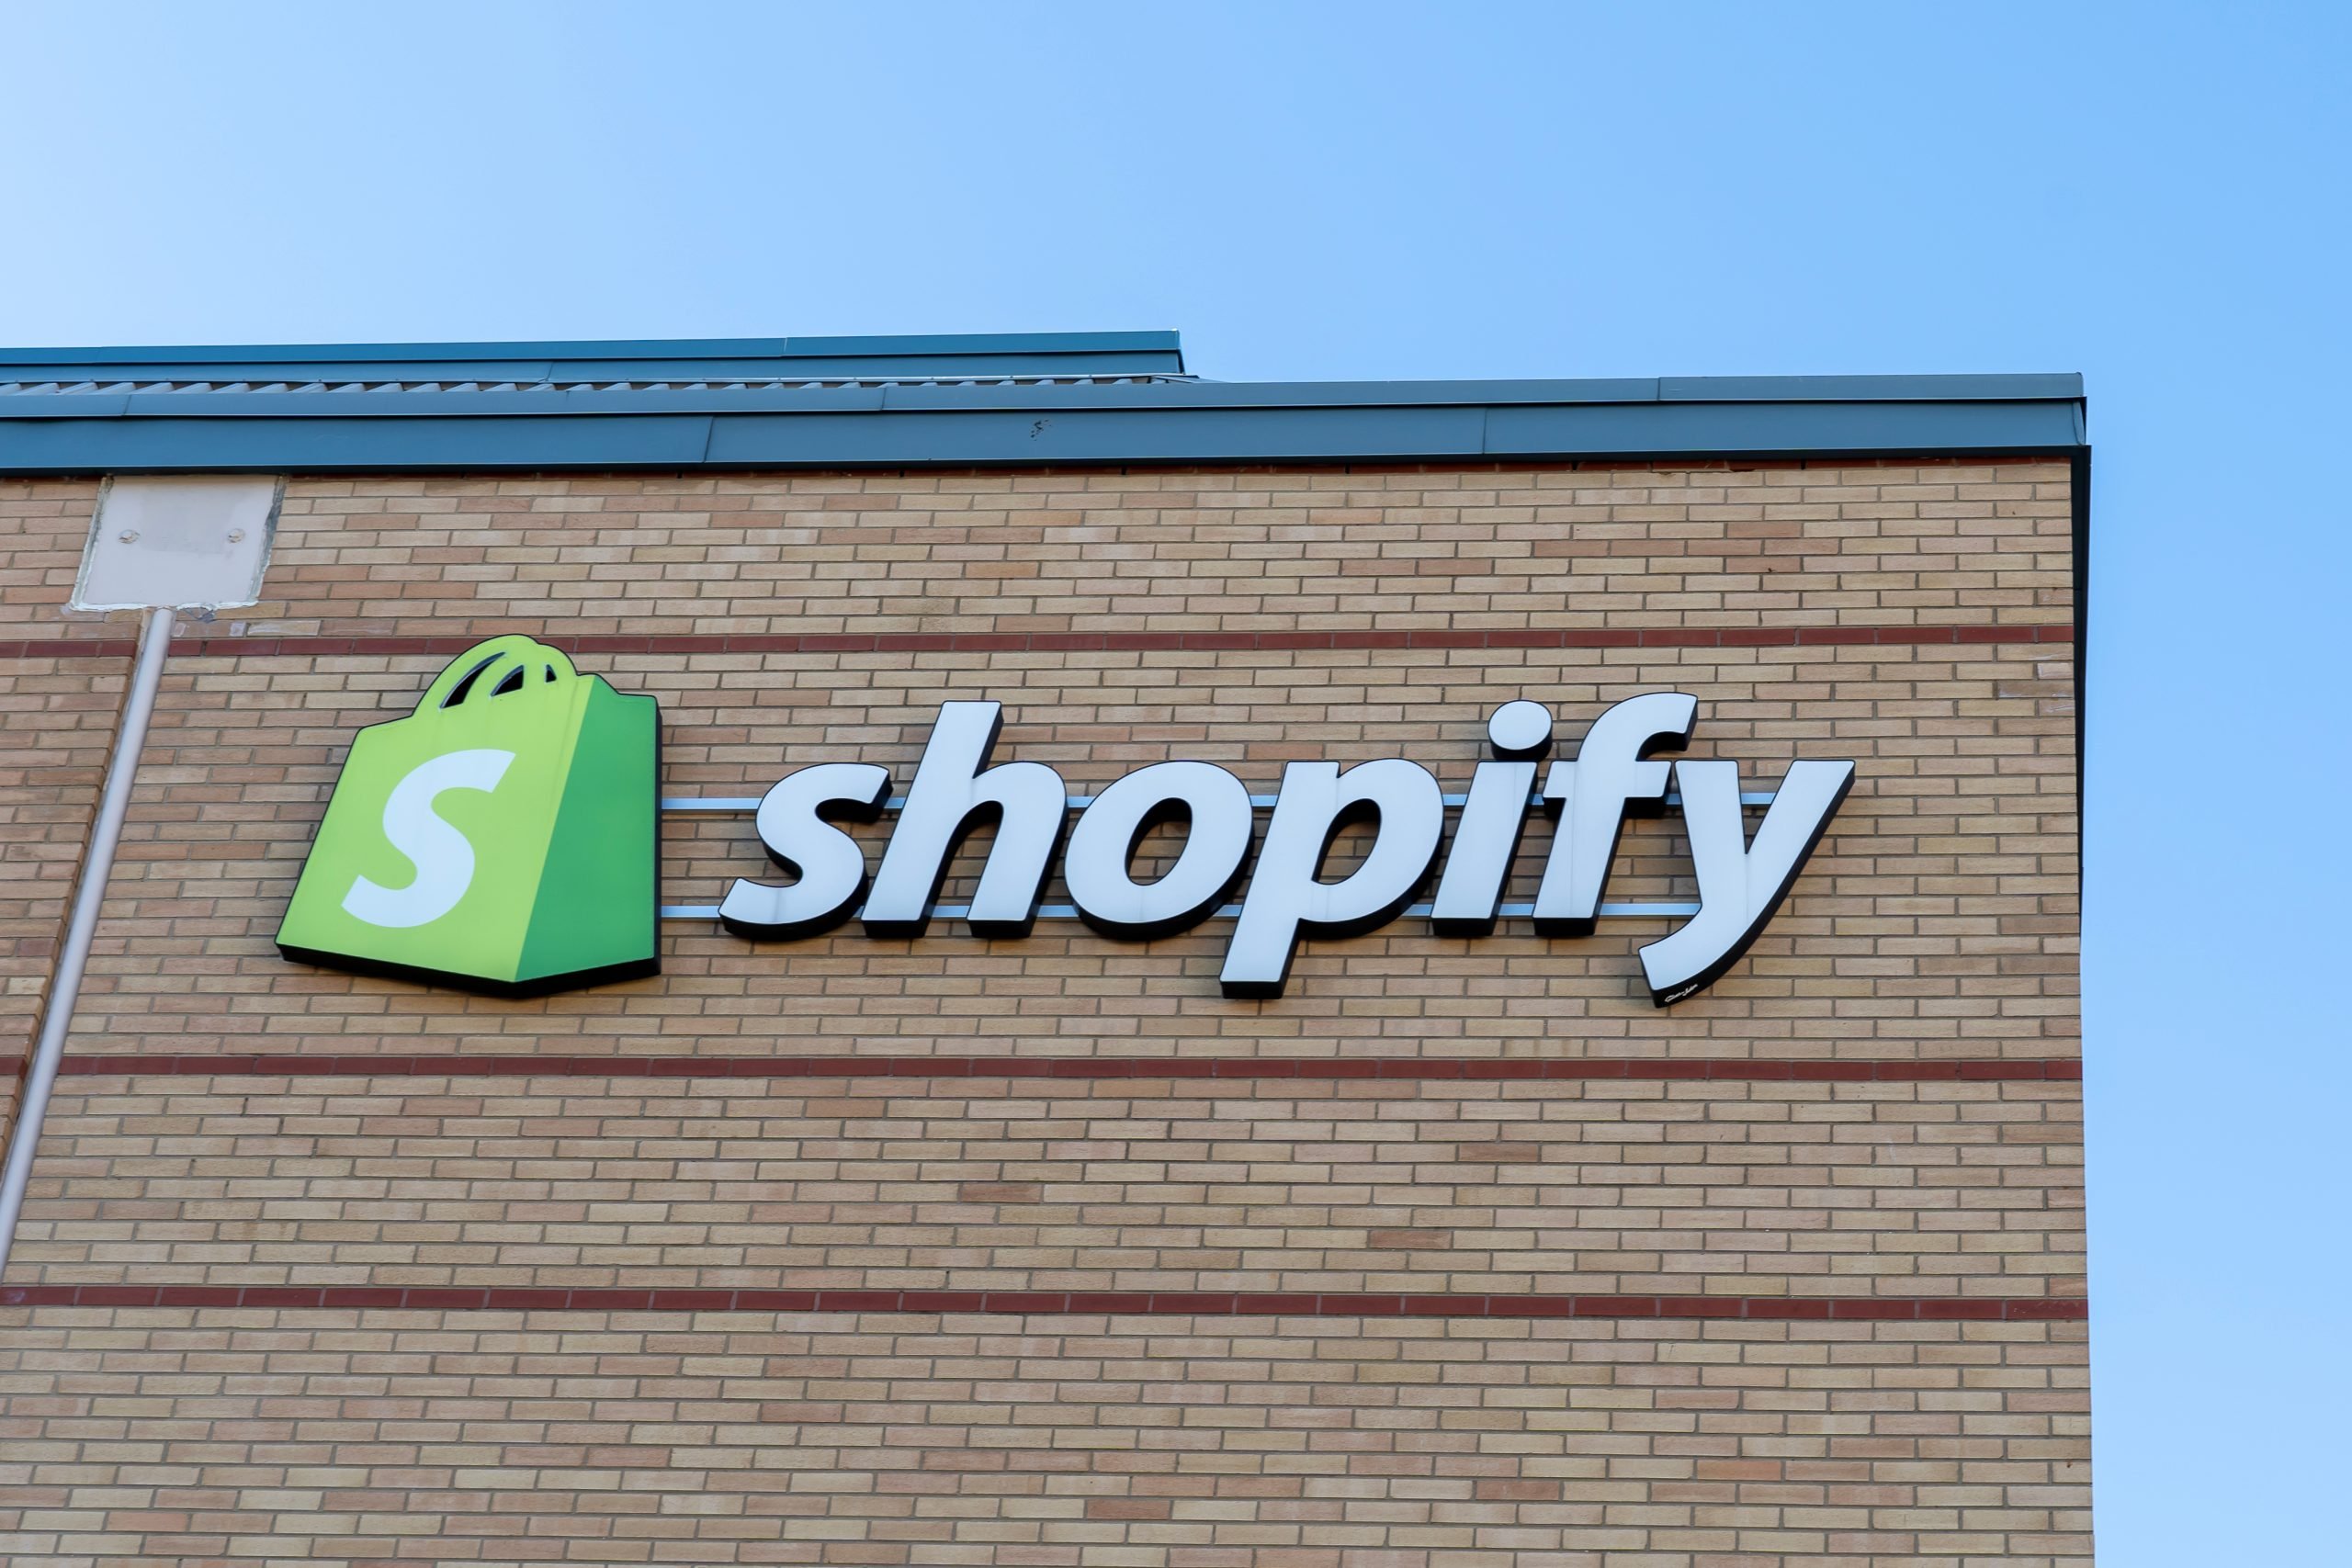 shopify-begynder-at-allow-its-e-commerce-customers-to-sell-nfts-directly.jpg